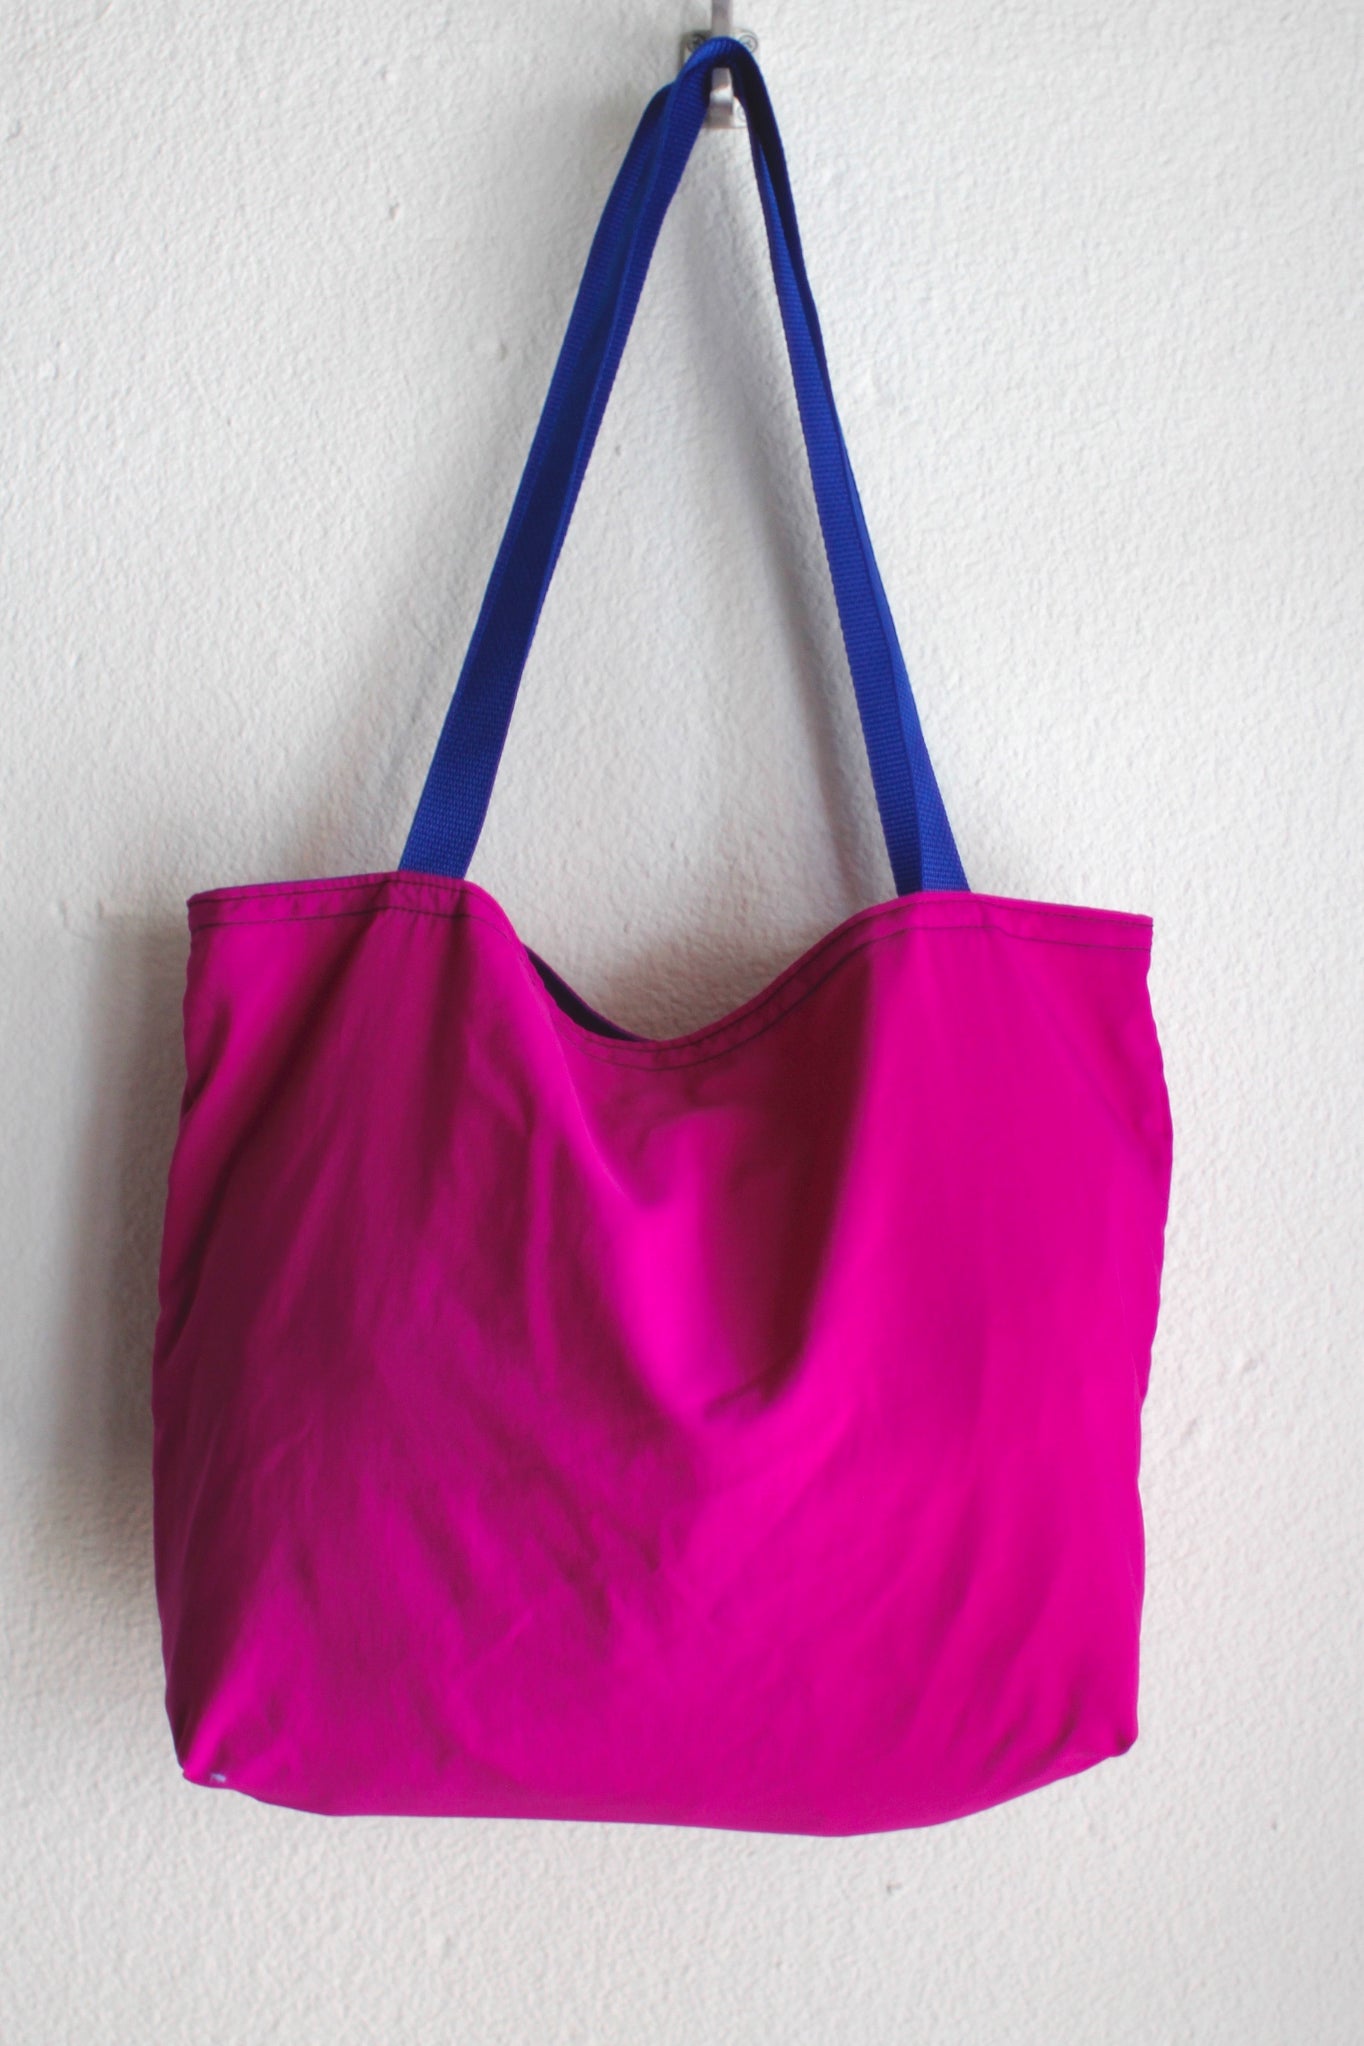 ATMOSPHERE SHOPPING TOTE